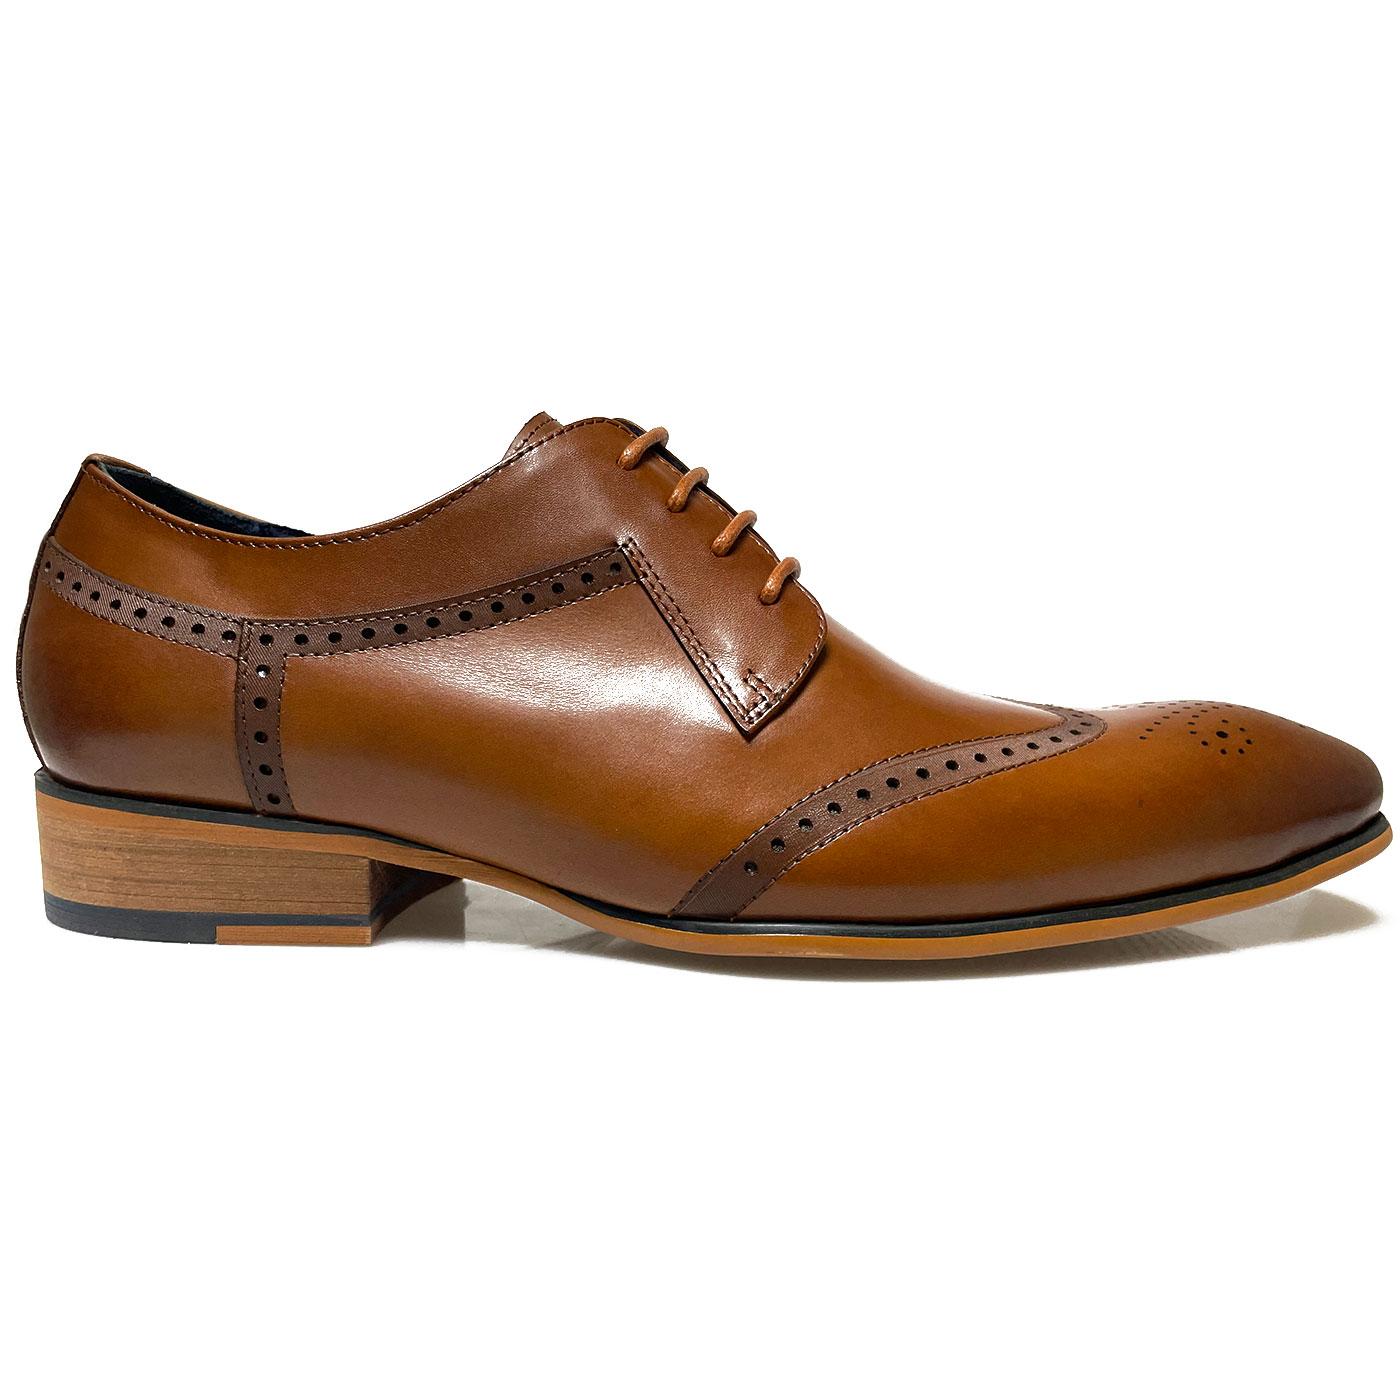 Nyland Paolo Vandini Leather Derby Brogues Tan